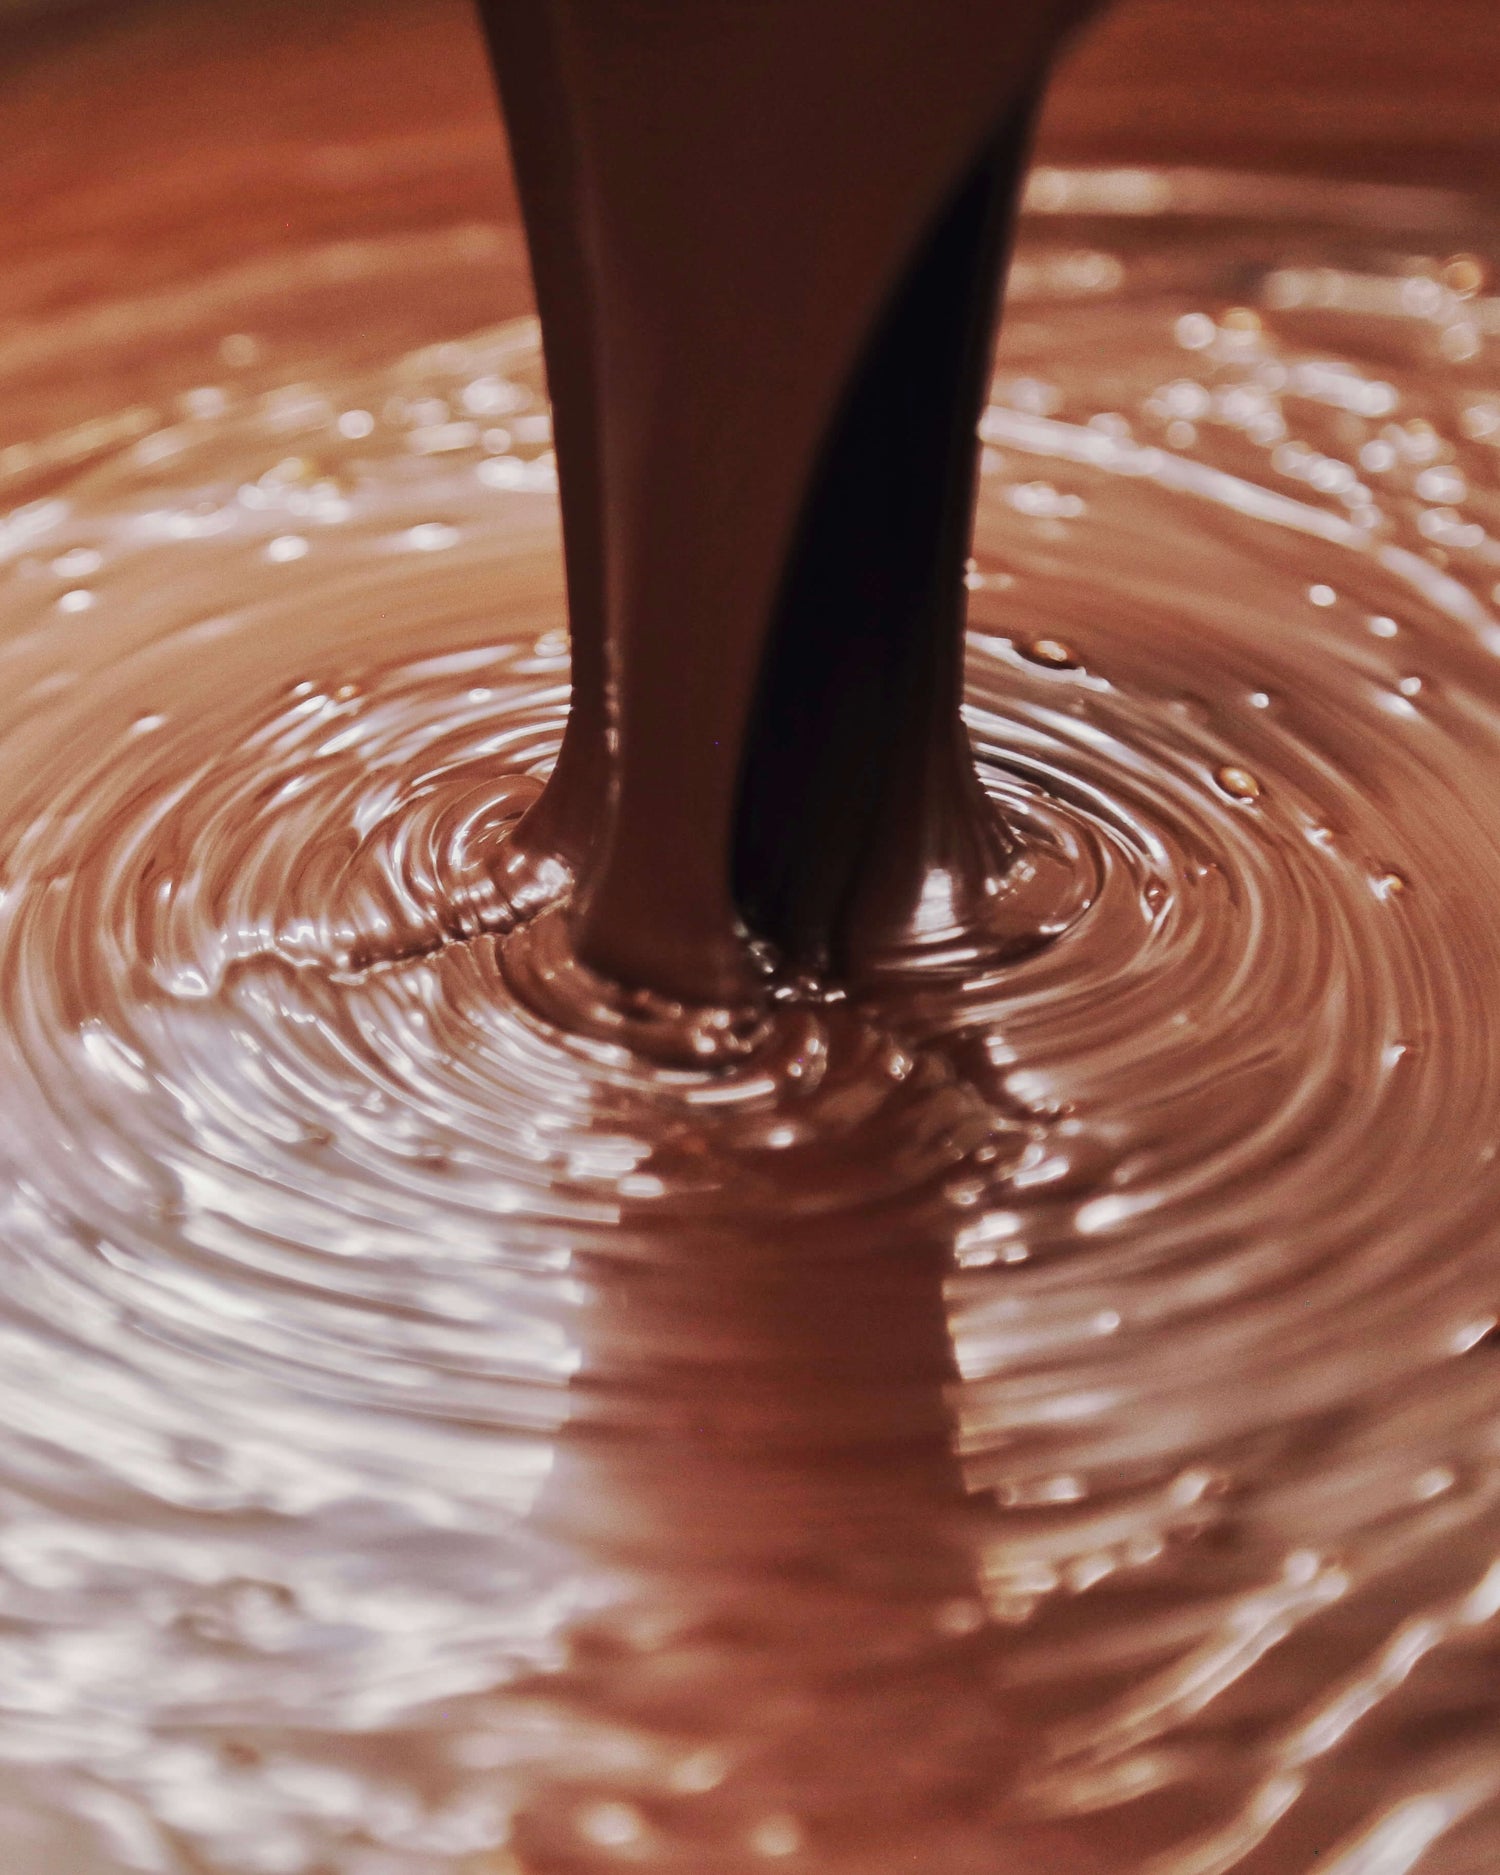 Image of liquid chocolate being poured